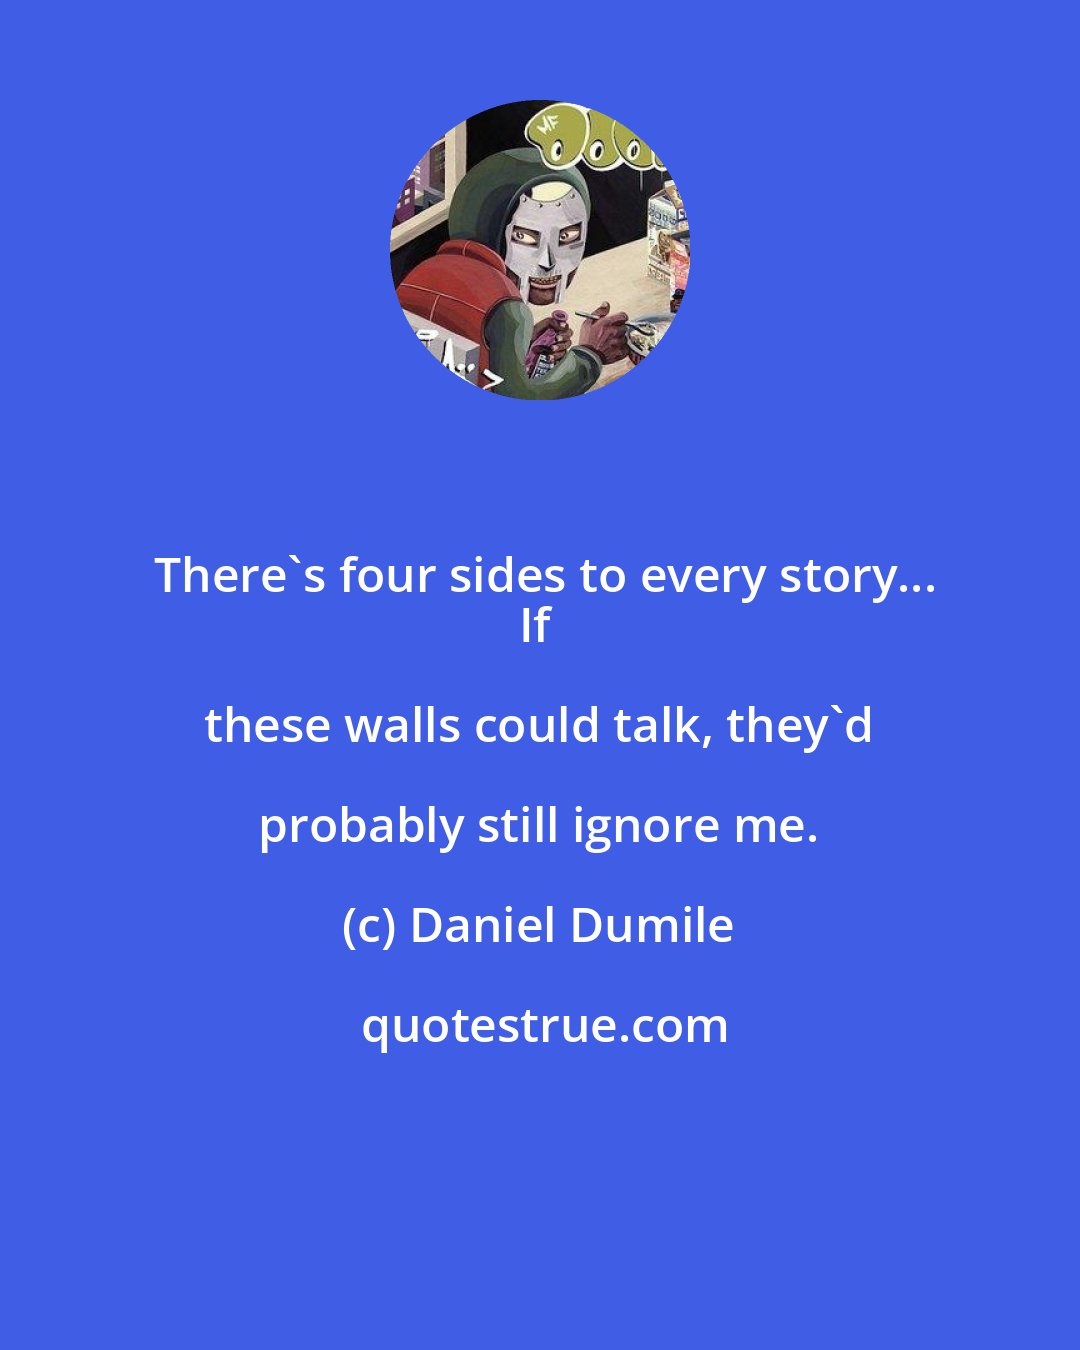 Daniel Dumile: There's four sides to every story...
If these walls could talk, they'd probably still ignore me.